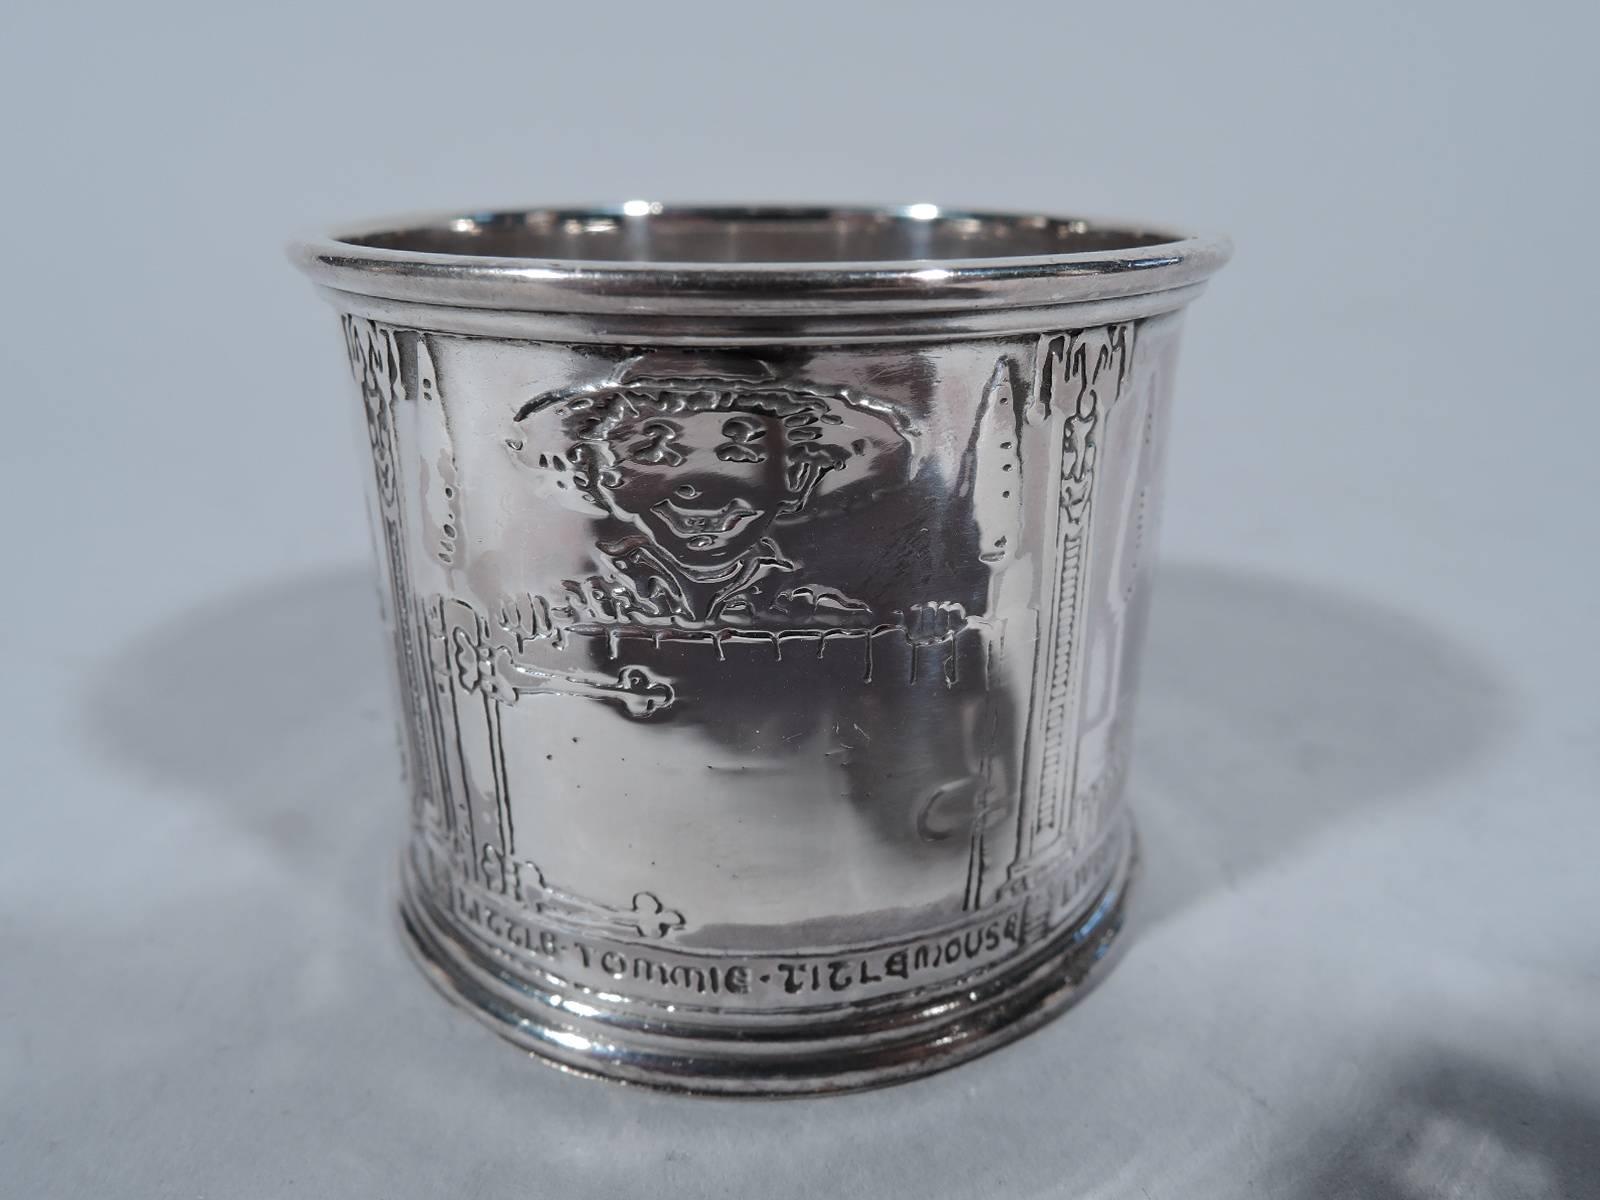 Sterling silver napkin ring with nursery rhyme theme. Made by Gorham in Providence, ca 1910. Little Tommy Tittlemouse is depicted in 4 frames, including one that shows him pursued by the club-wielding man who has Caught Him Fishing in Other Men’s